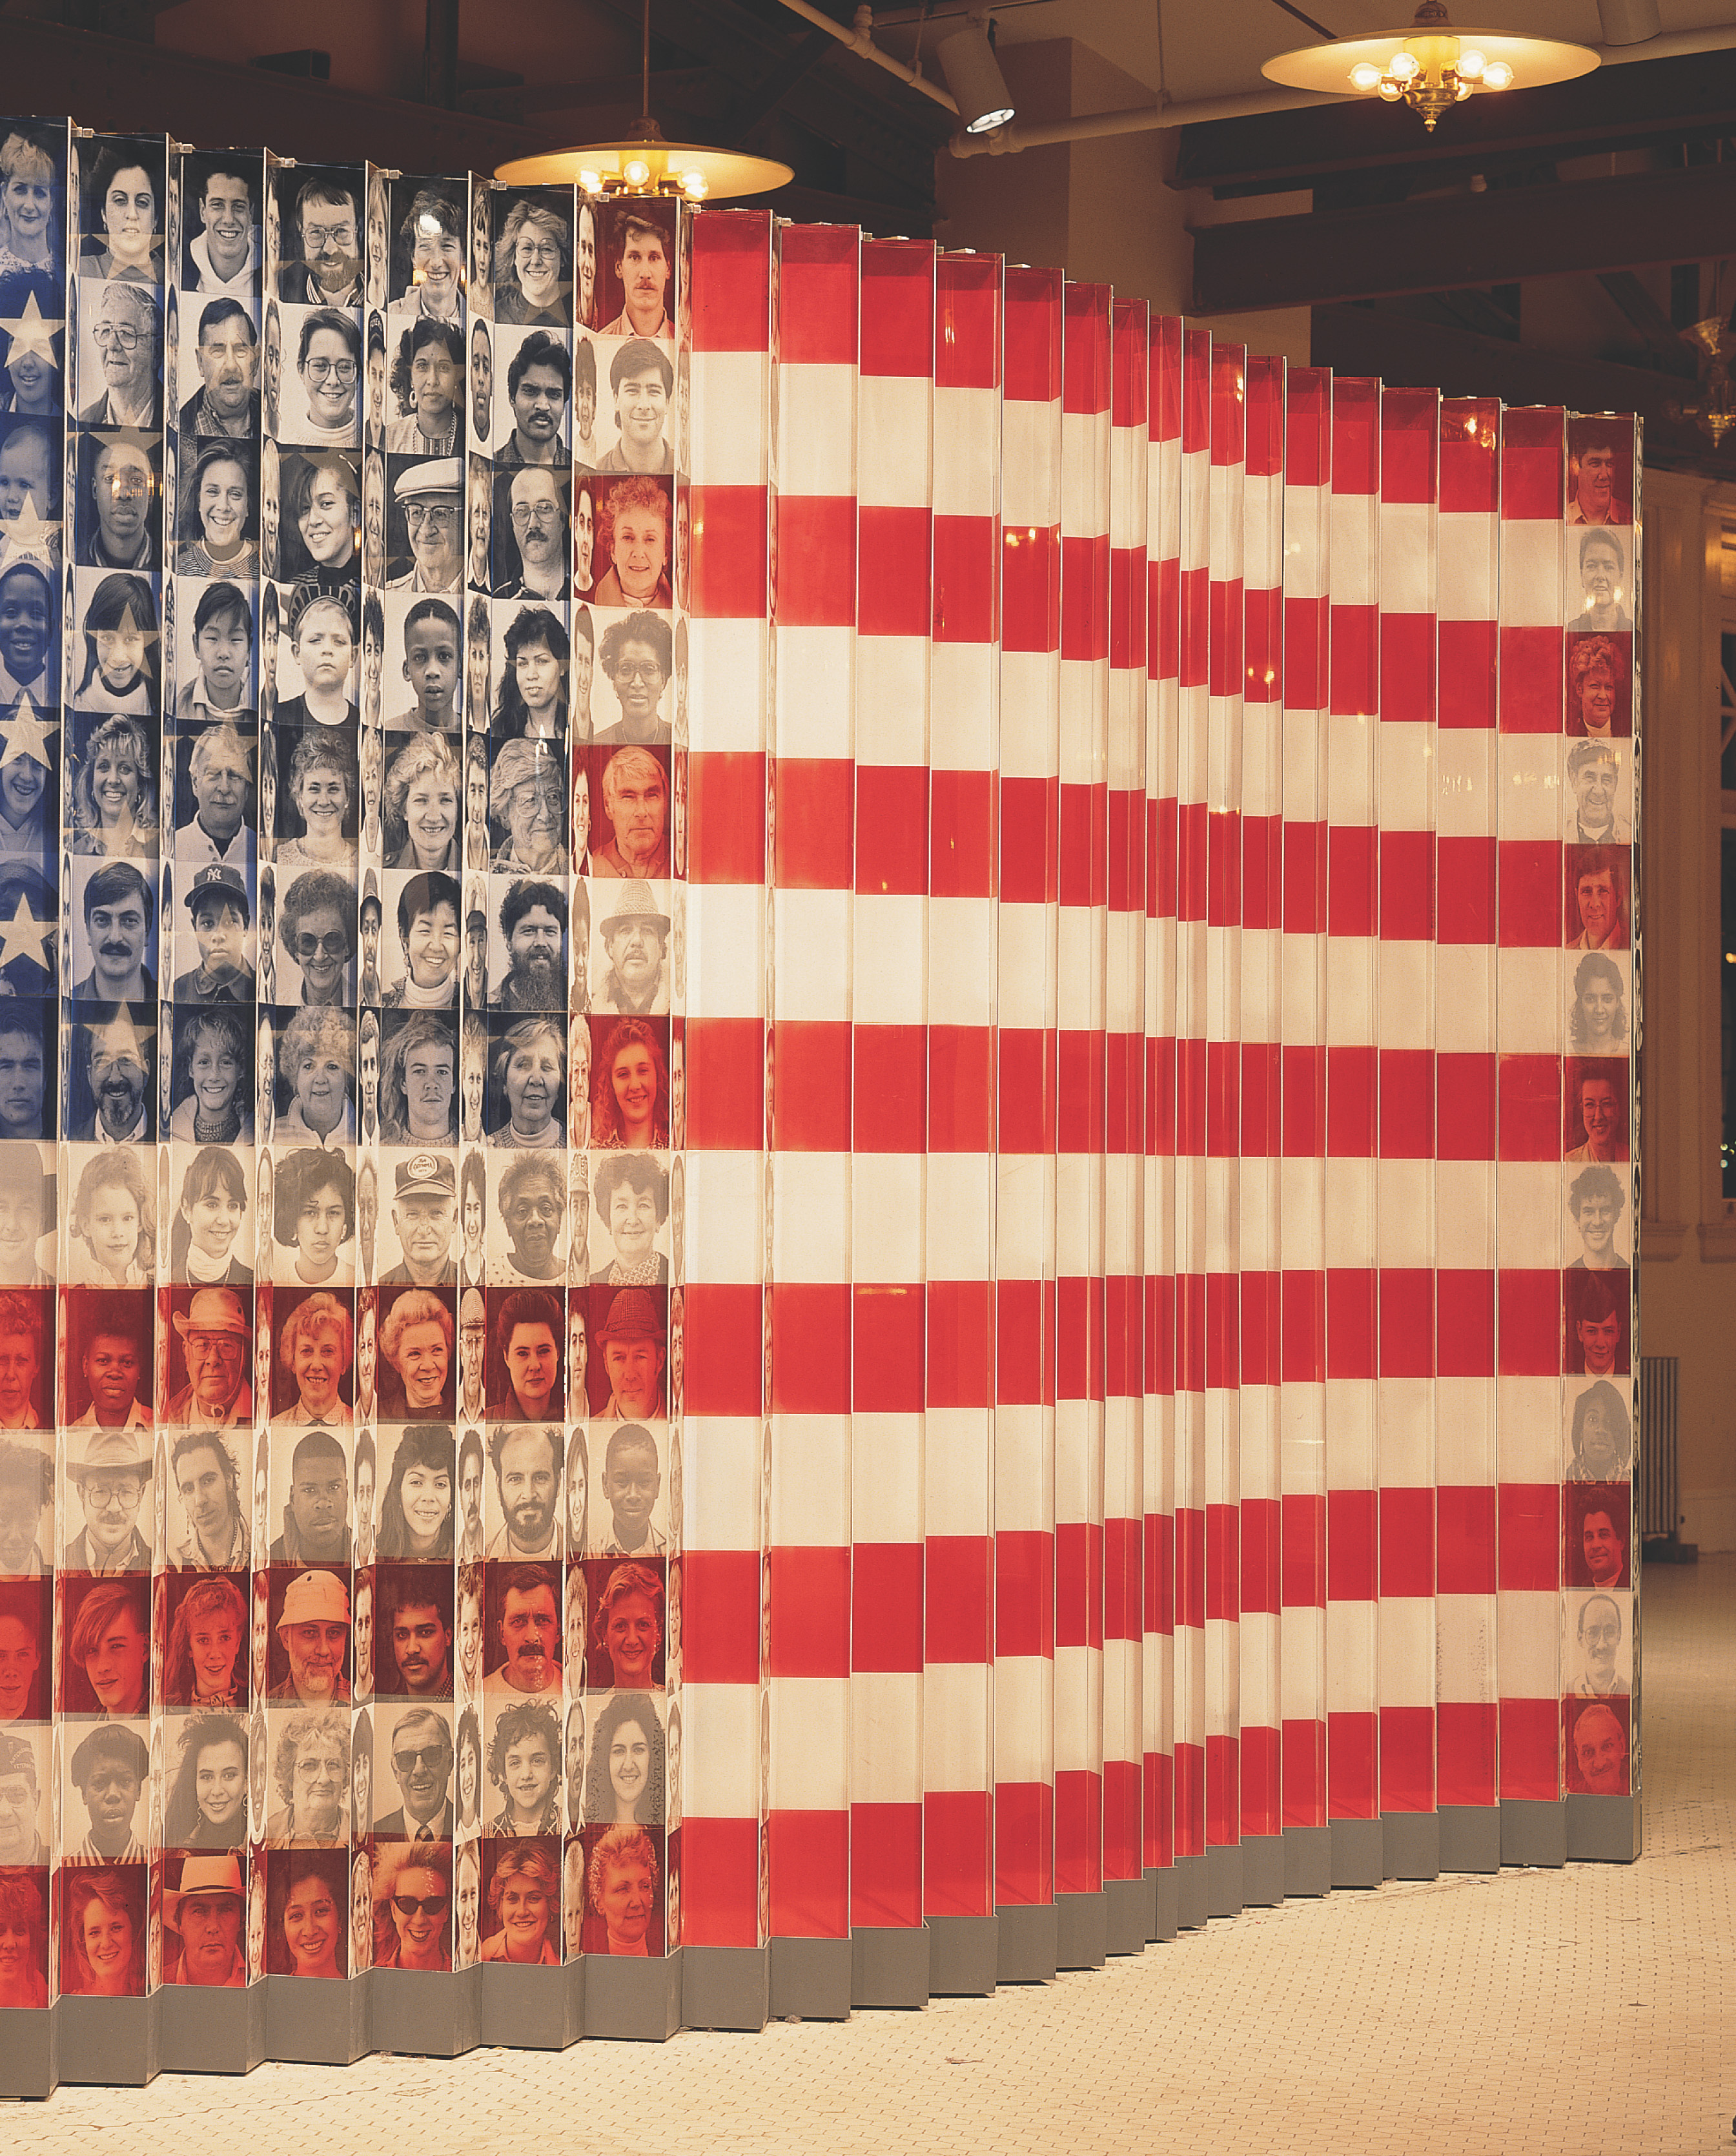 a wall-sized exhibit shows faces of Americans over the stars and stripes of the American flag.